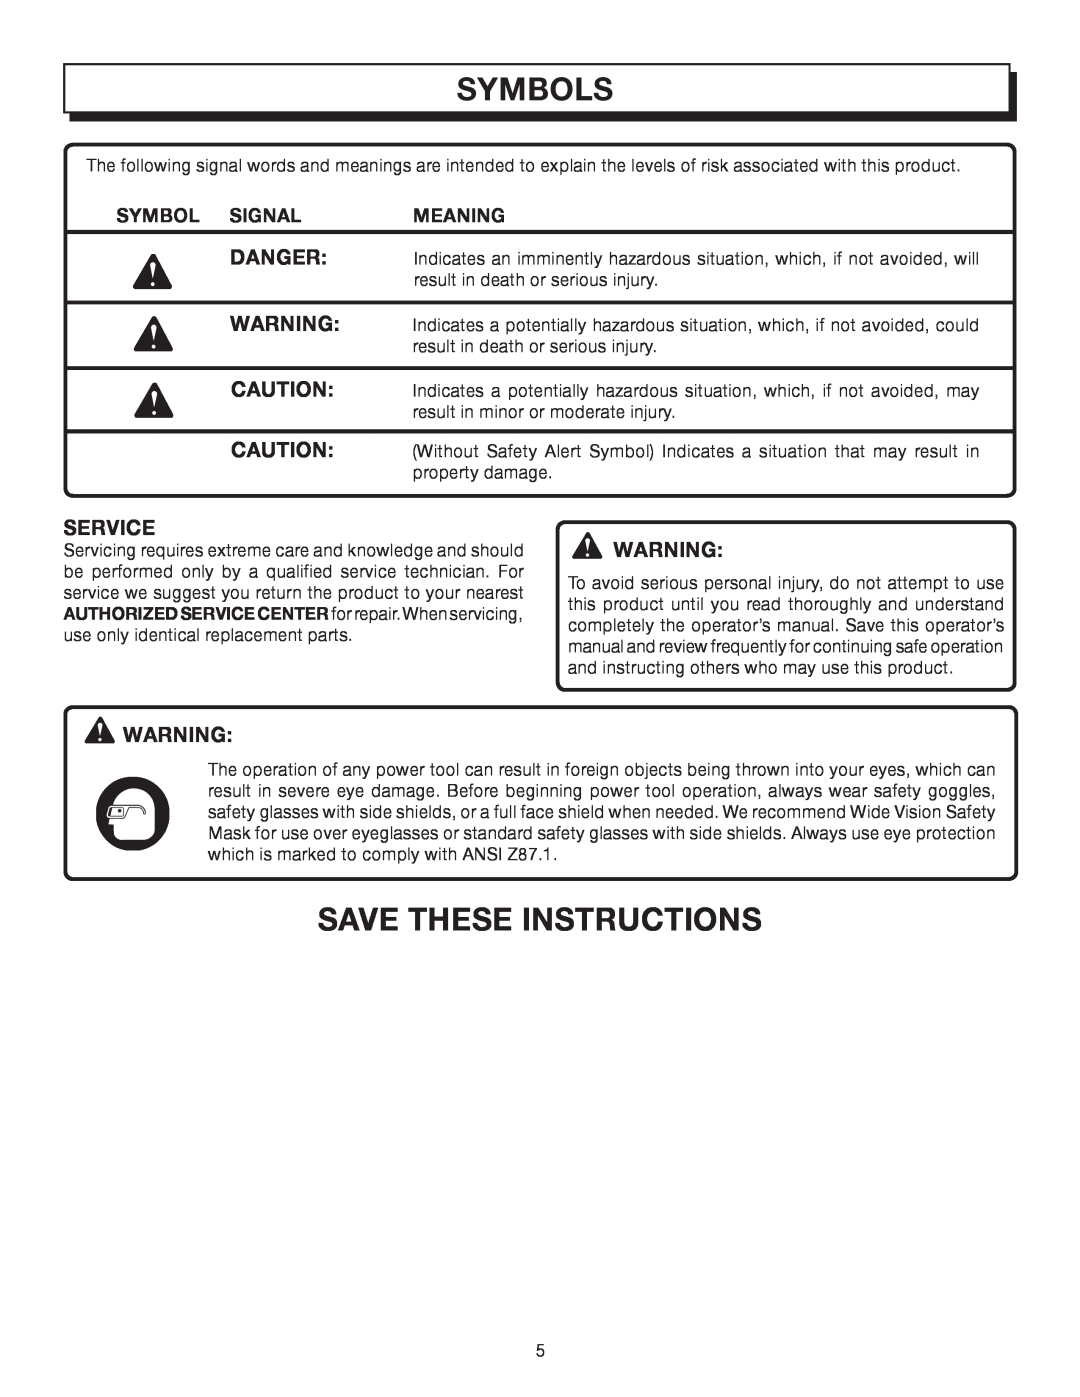 Homelite UT08512A manual Save These Instructions, Symbols, Service, Symbol Signal, Meaning 